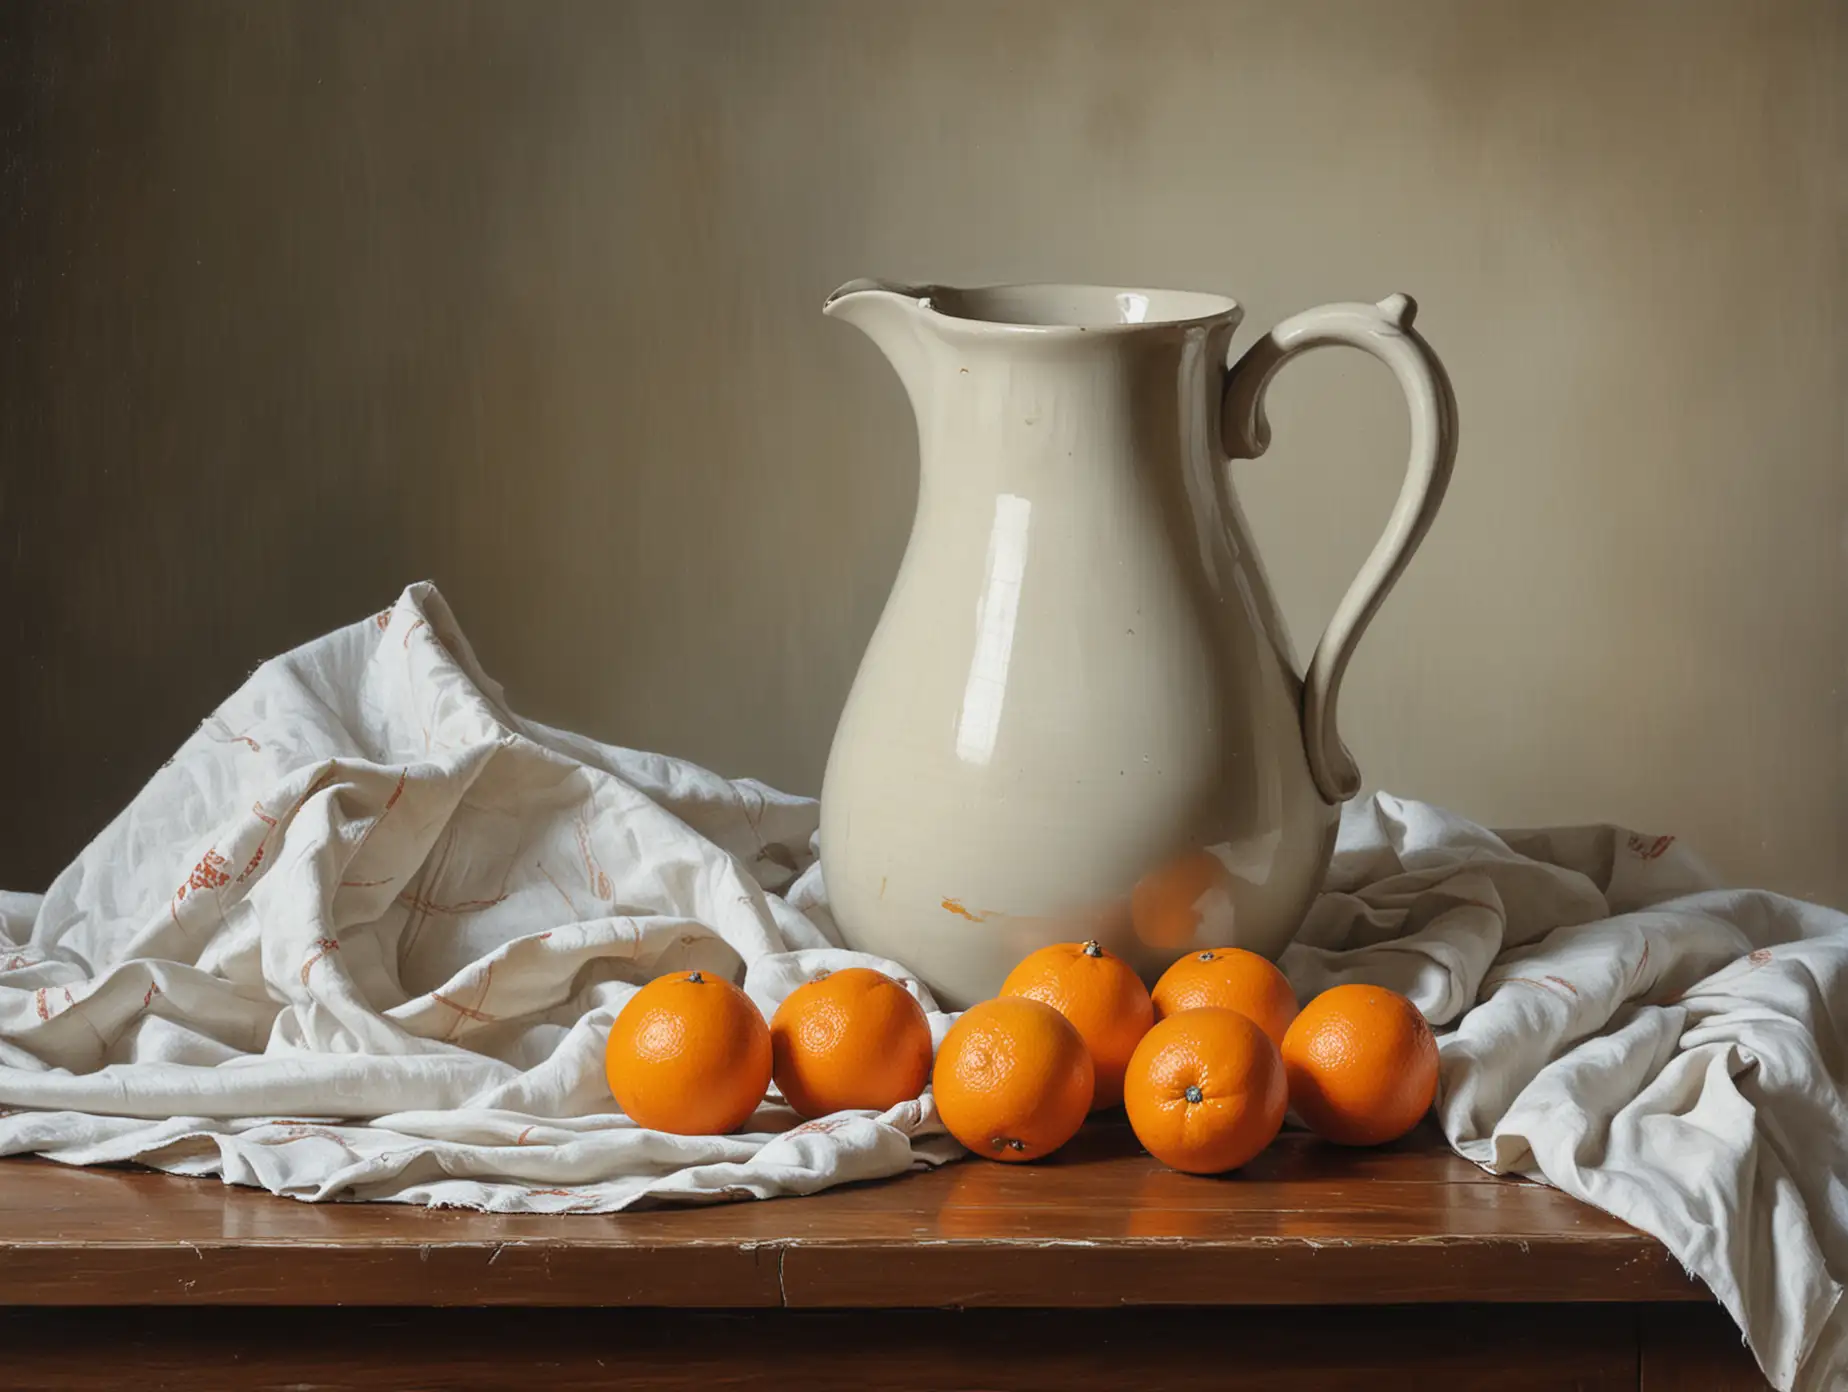 Rustic Pitcher Still Life with Oranges on Tablecloth